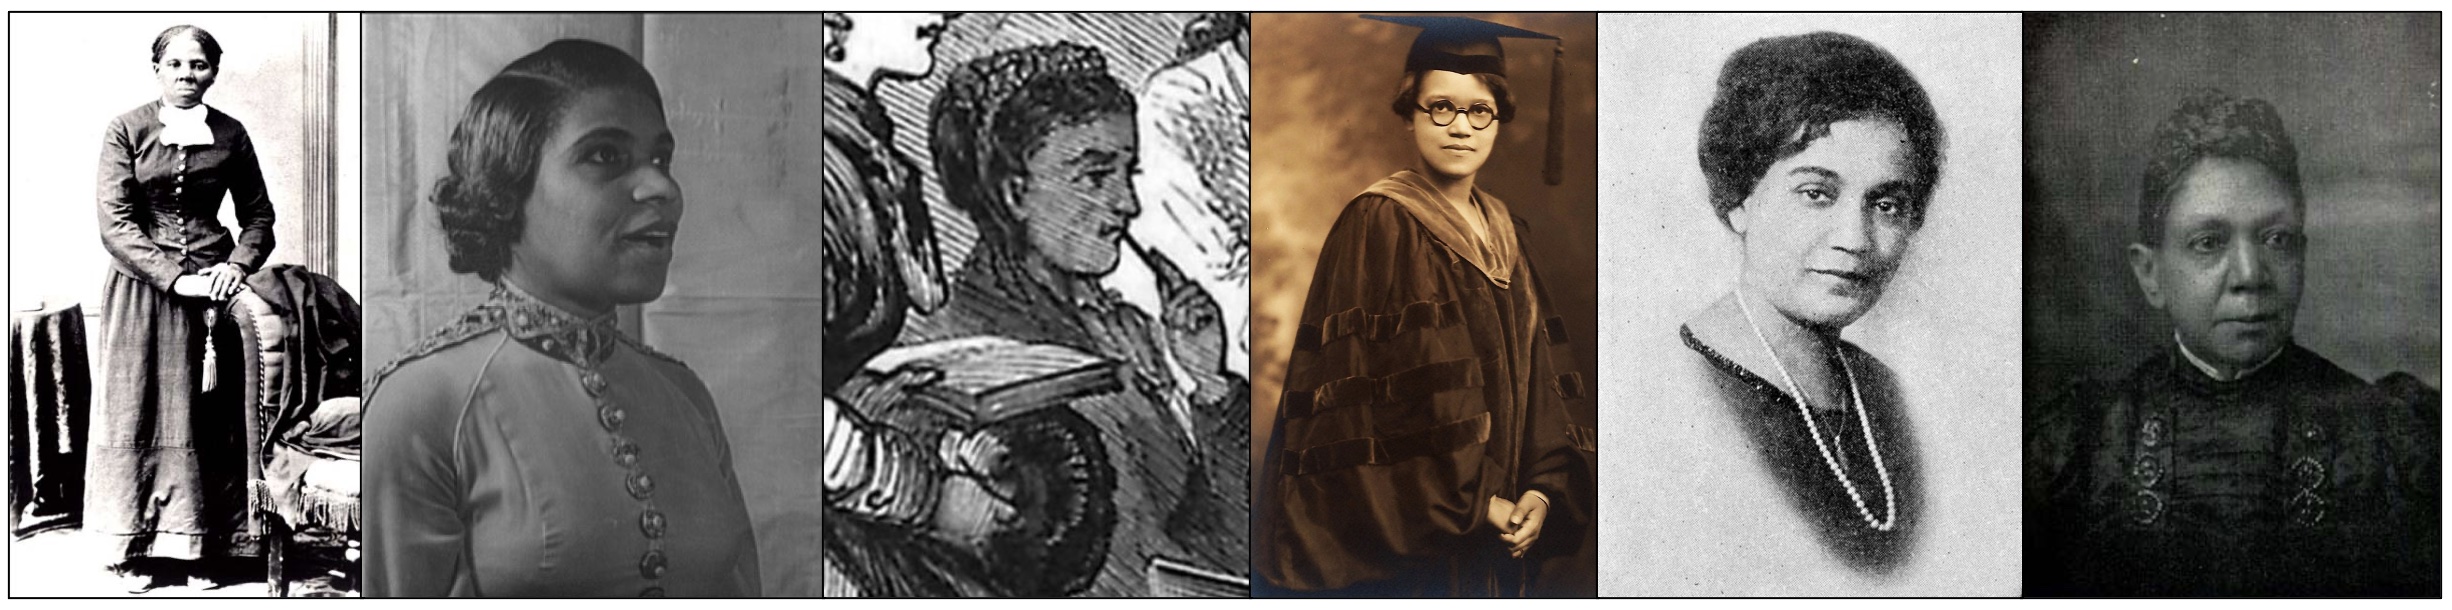 Six images in a row, each of African American women. First, from left to right, a full body black and white portrait of Harriet Tubman standing next to a chair with her hands on the arm of the chair. Second, black and white portrait of Marian Anderson turned, facing to her left, singing, in 1940. Third, cropped black and white newspaper drawing of a side profile of Dr. Rebecca J. Cole sitting at a meeting with other women as she holds a writing implement toward her mouth as she listens. Fourth, sepia toned photo of Dr. Sadie Tanner Mossell Alexander wearing glasses and standing in Ph.D. graduation regalia with her hands classed at her waist. Fifth, black and white portrait of Jessie Redmon Fauset wearing a long pearl necklace. Sixth, black and white, upper body portrait of Fanny Jackson Coppin looking slightly to her left.